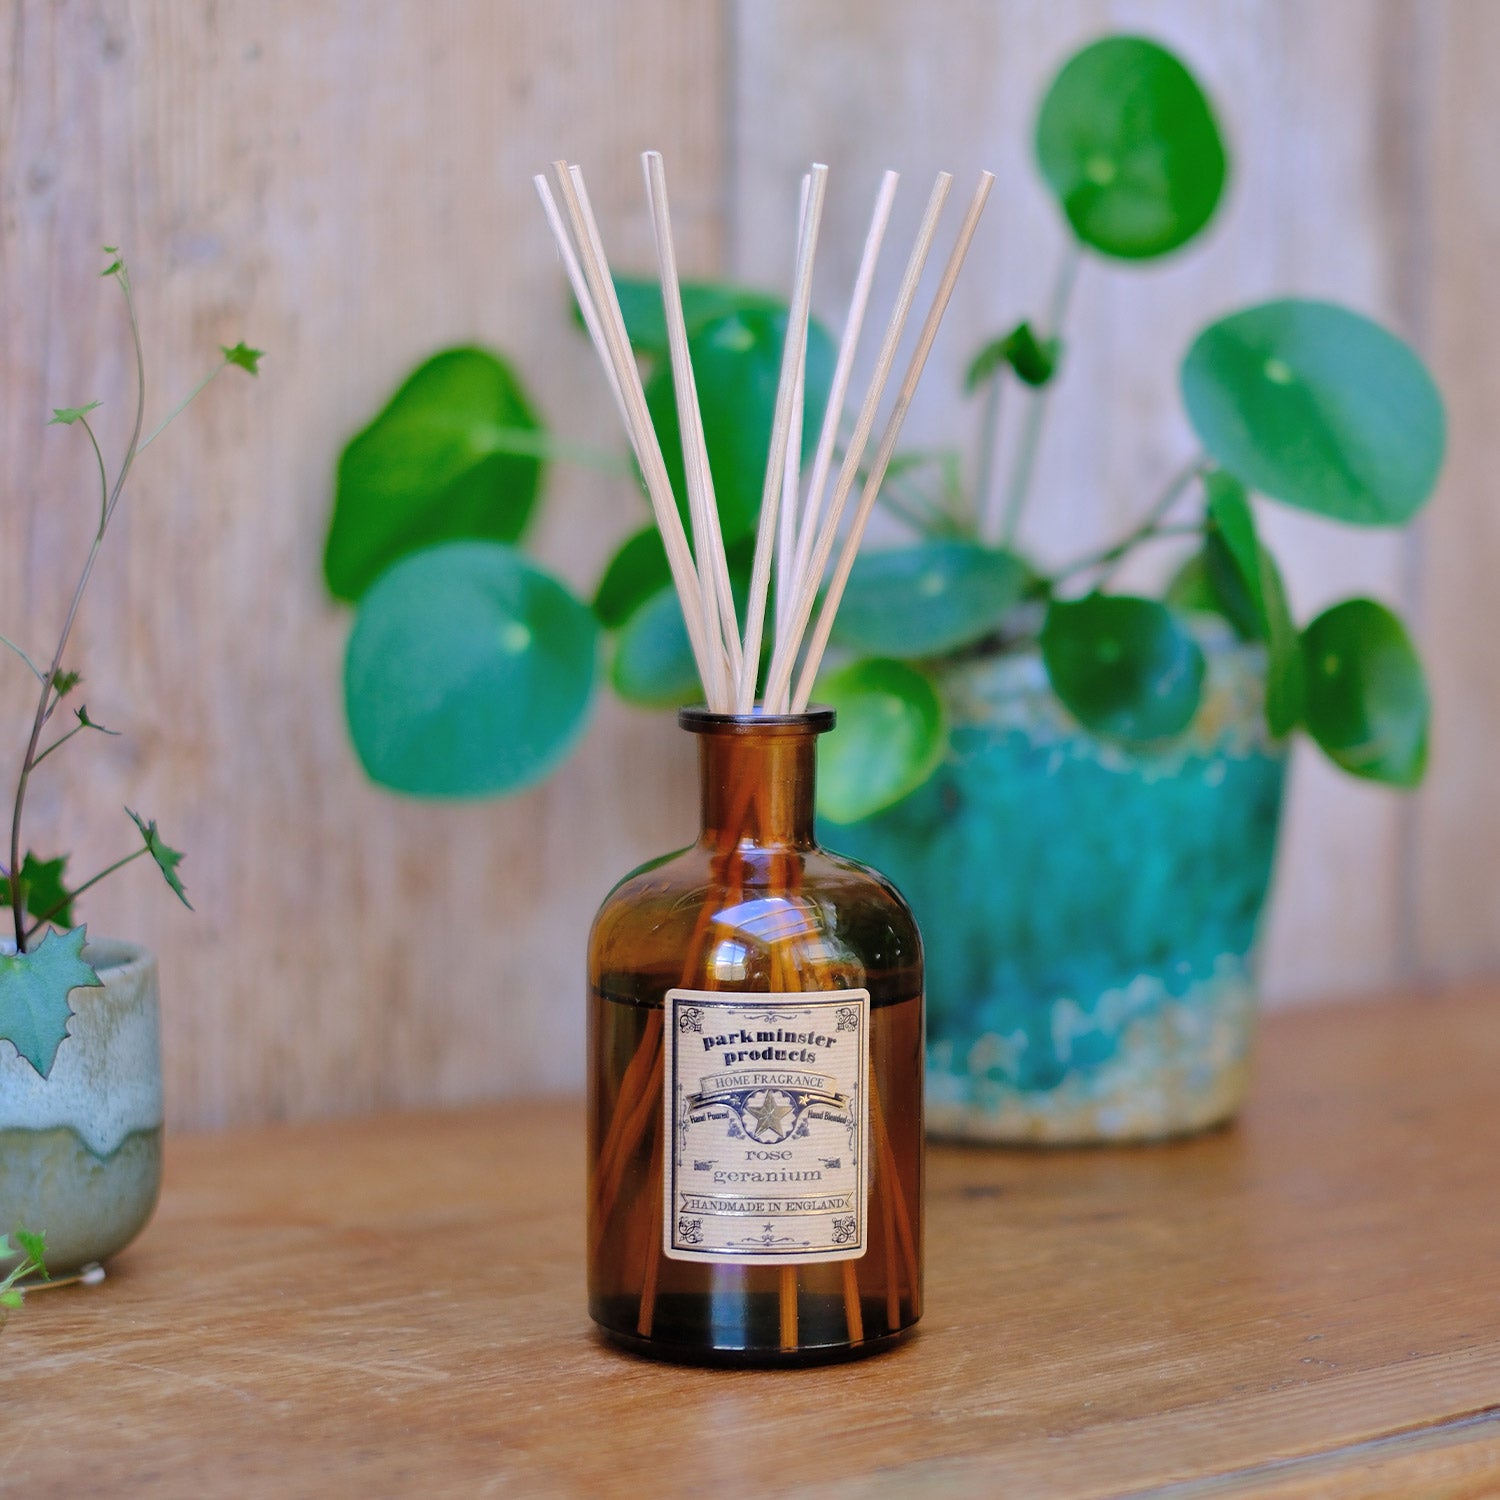 Transform your living space with the delicate scent of Rose Geranium using Parkminster's 200ml amber glass Apothecary Reed Diffuser. Handcrafted with care in our Cornish workshop, this diffuser features a natural, non-chemical fragrance and contemporary glassware design